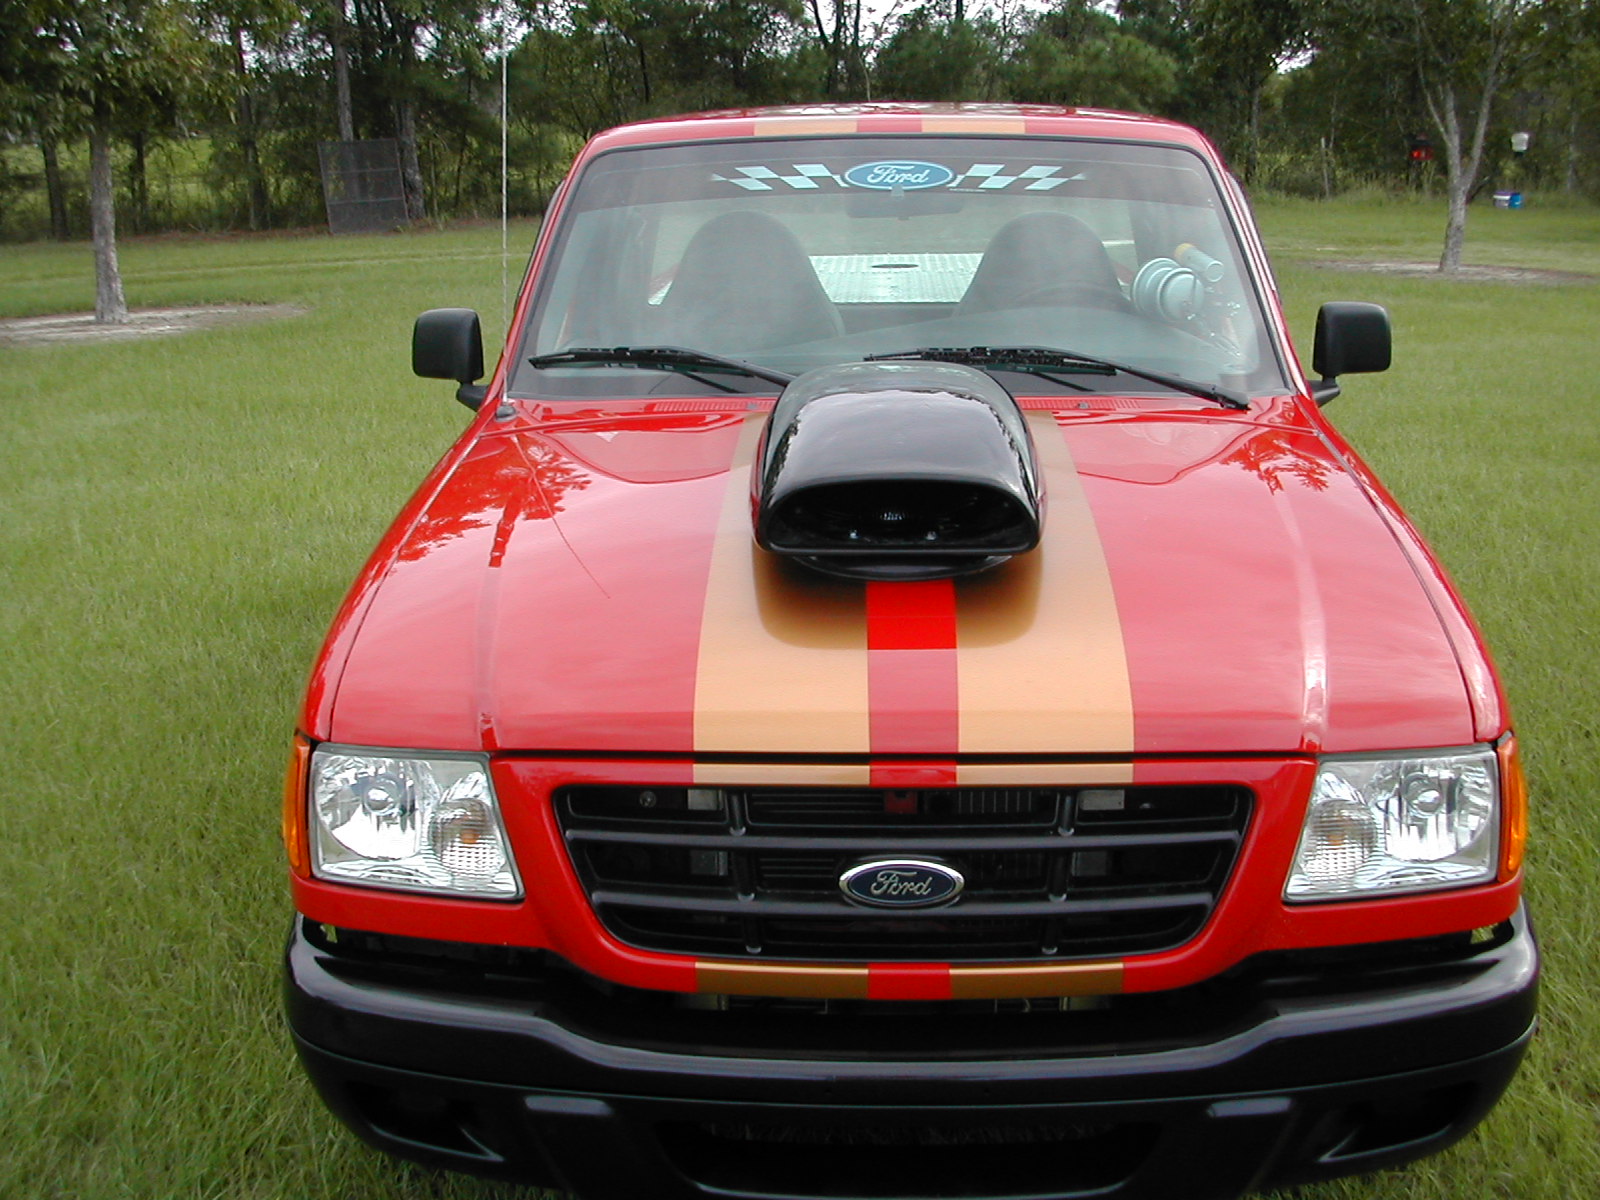 Ford ranger forum classifieds #8